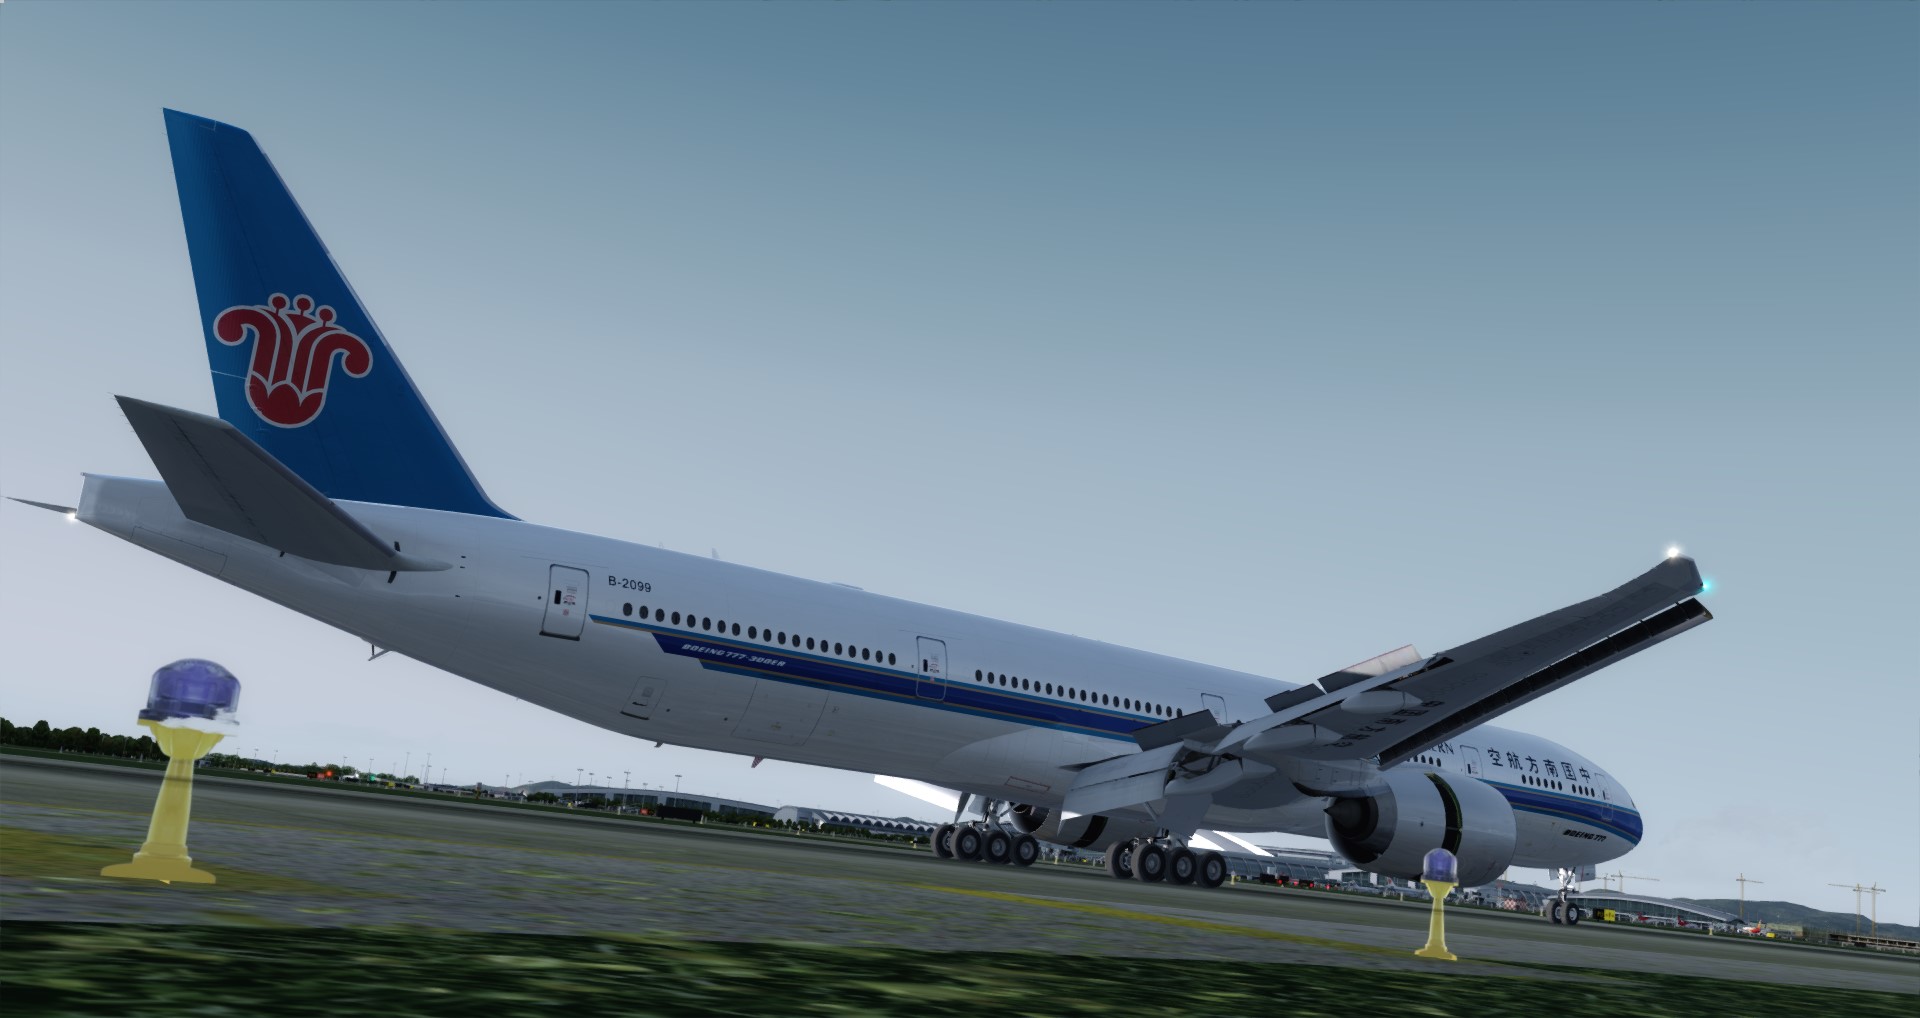 P3D V4 77W China Southern Airlines WADD-ZGGG 营救同胞-6730 